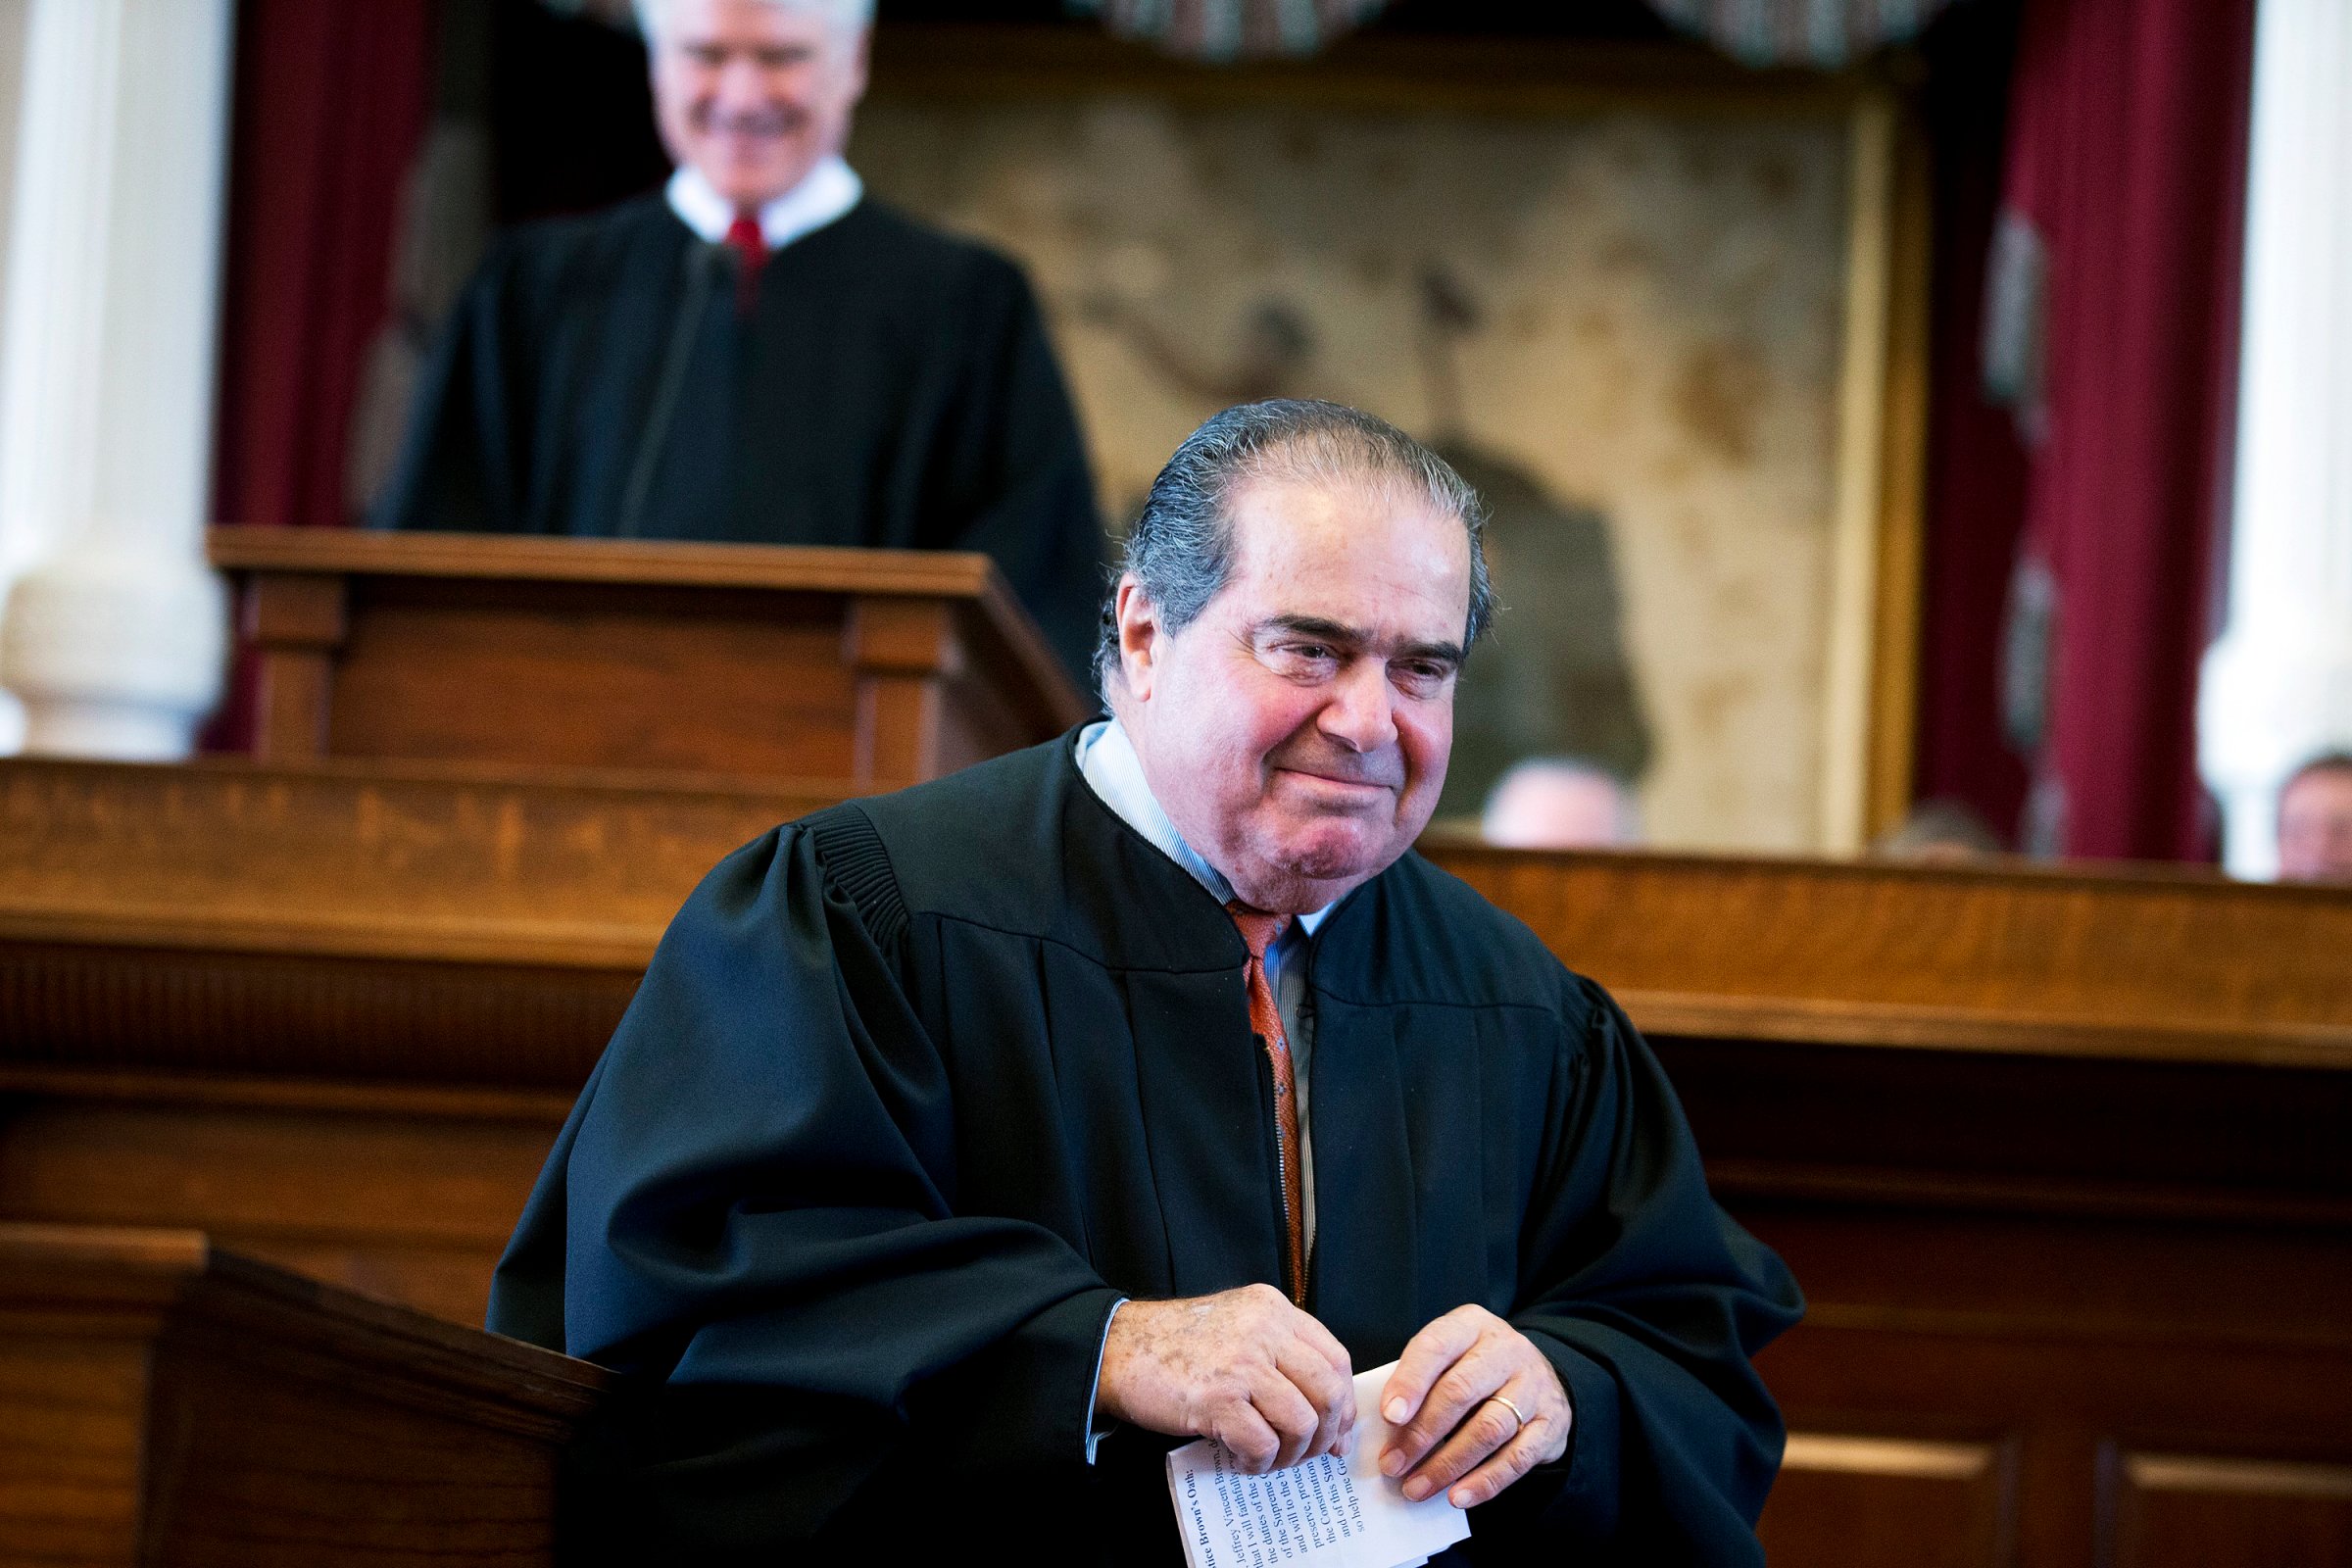 This Nov. 12, 2013 photo shows Supreme Court Justice Antonin Scalia during the investiture of Texas Supreme Court Chief Justice Nathan Hecht at the Texas Capitol in Austin.